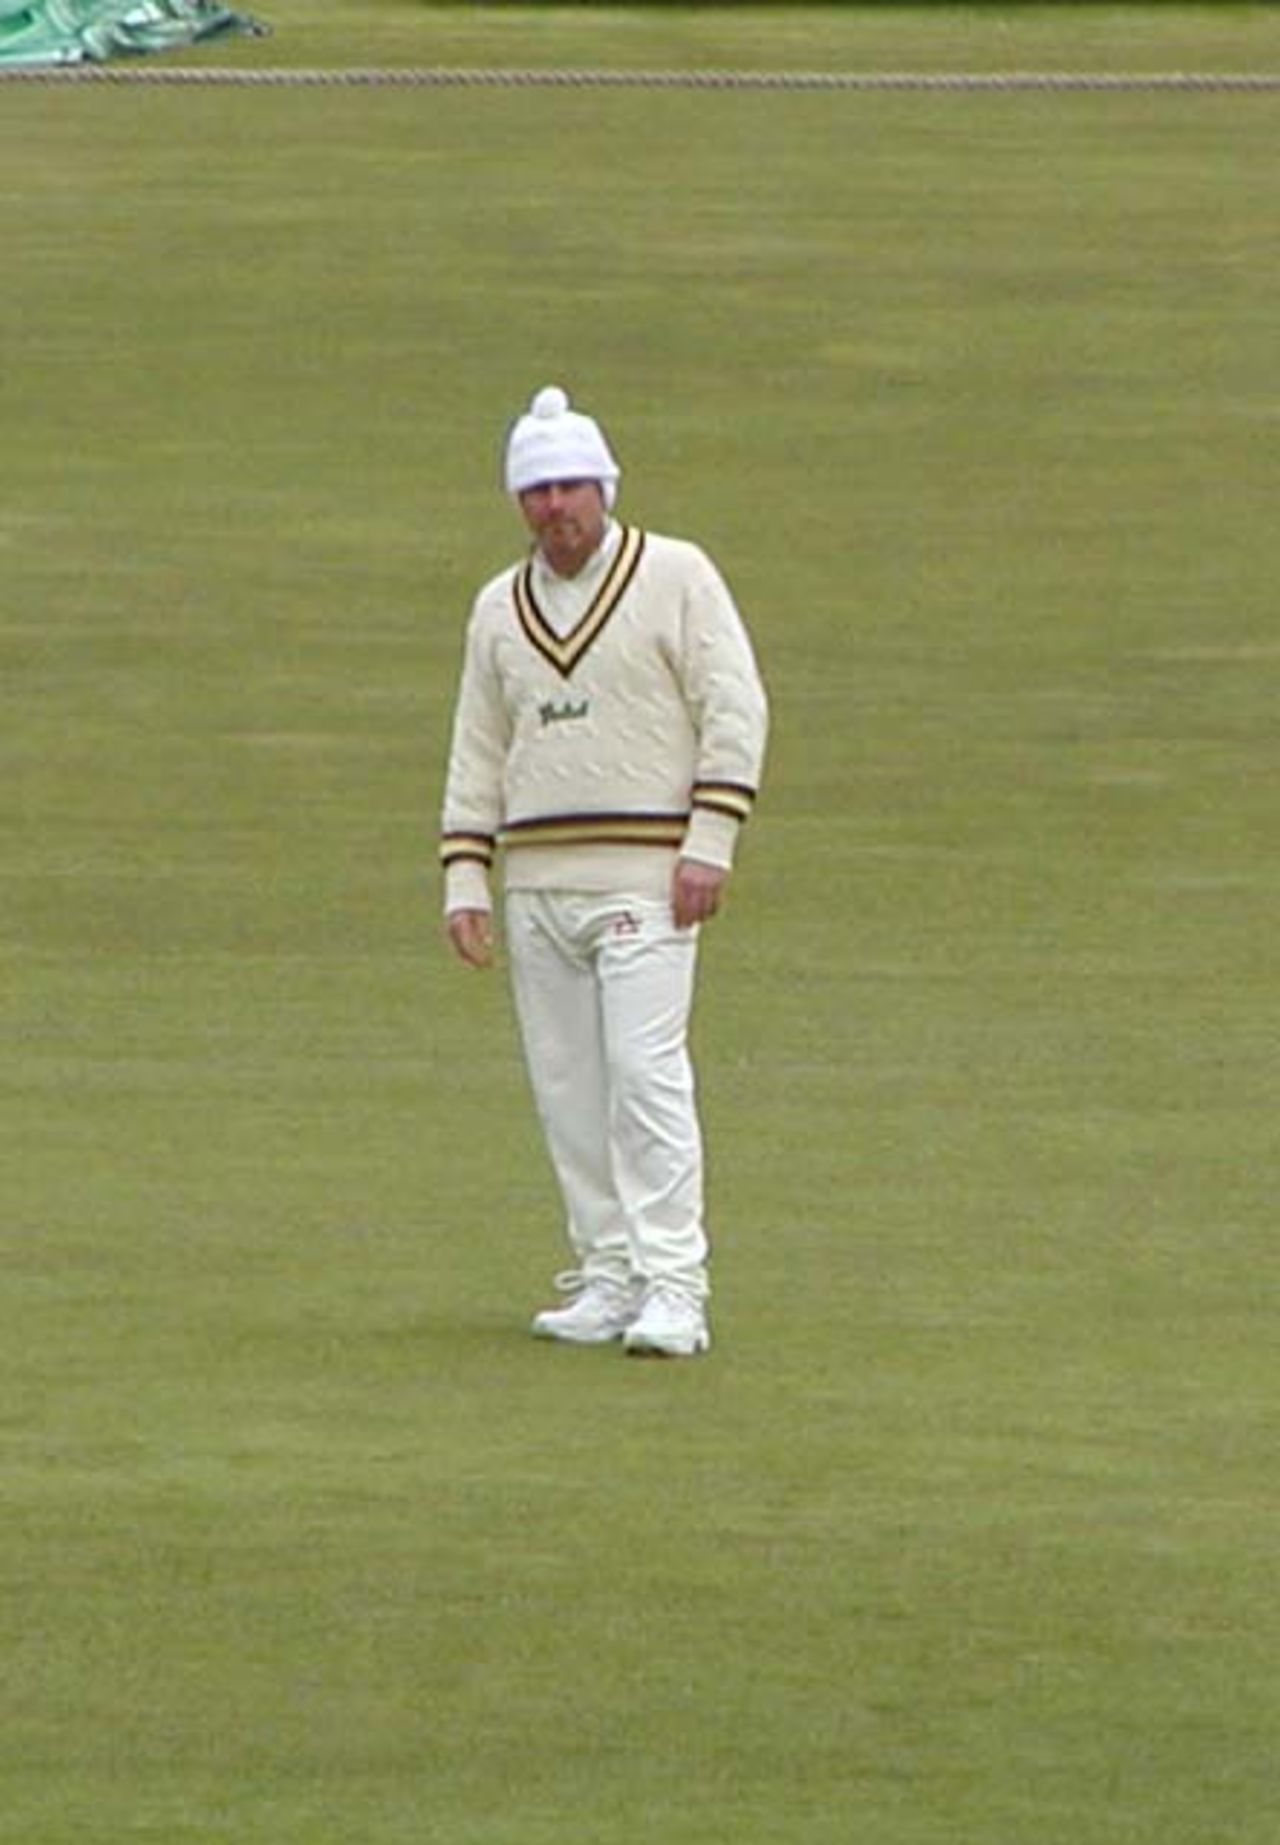 Robin Smith sports a bobble hat to protect from Artic conditions at Edgbaston.